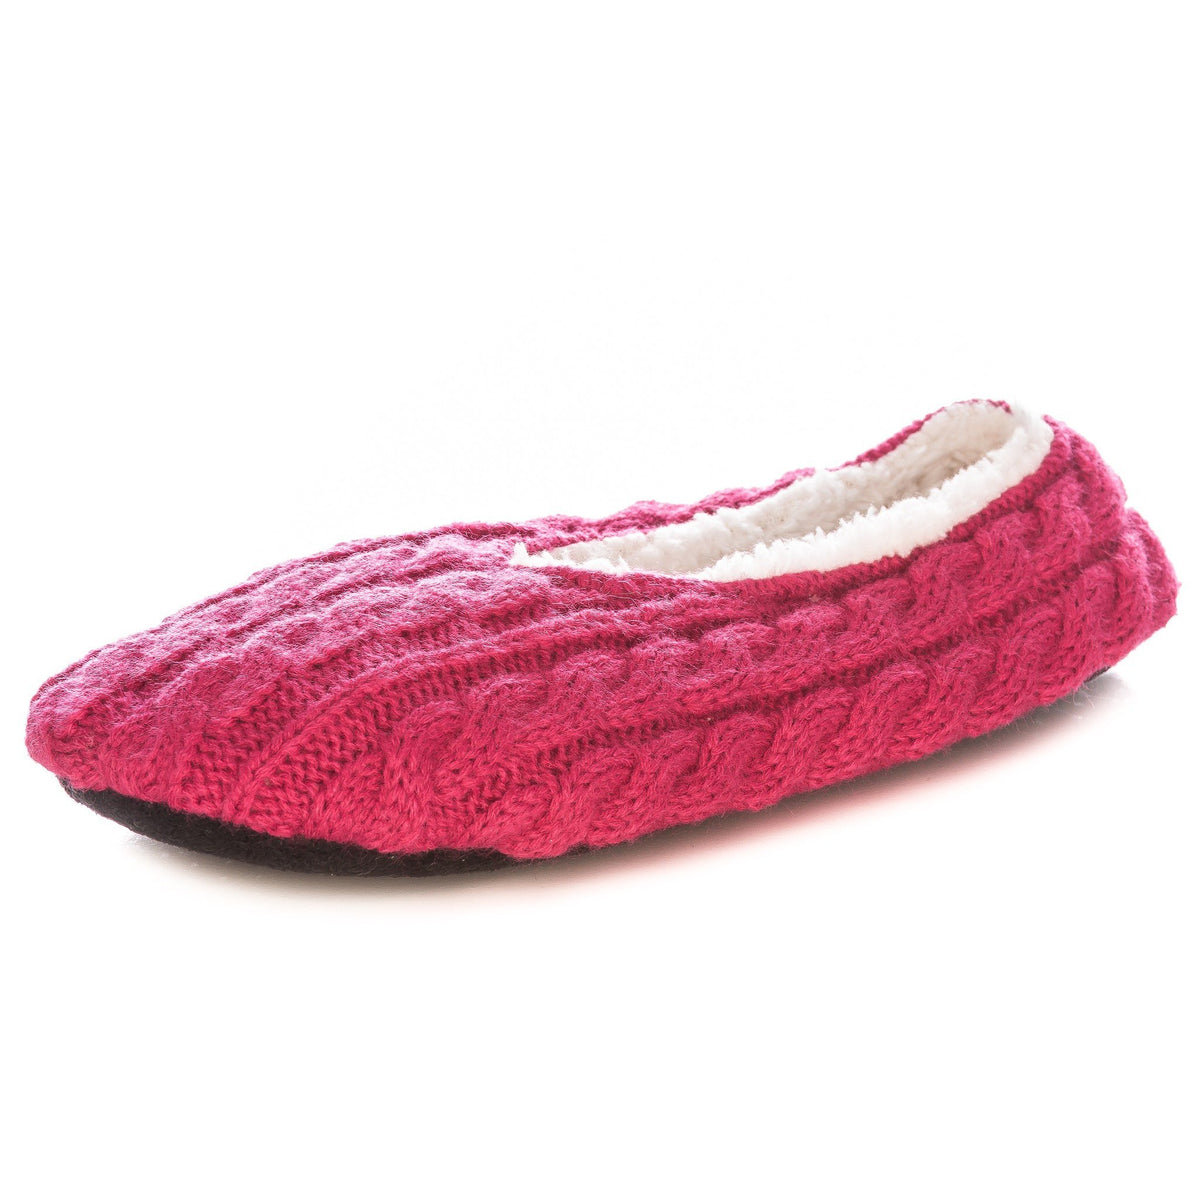 Women's Cable Knit Indoor Ballet Slippers - Pink